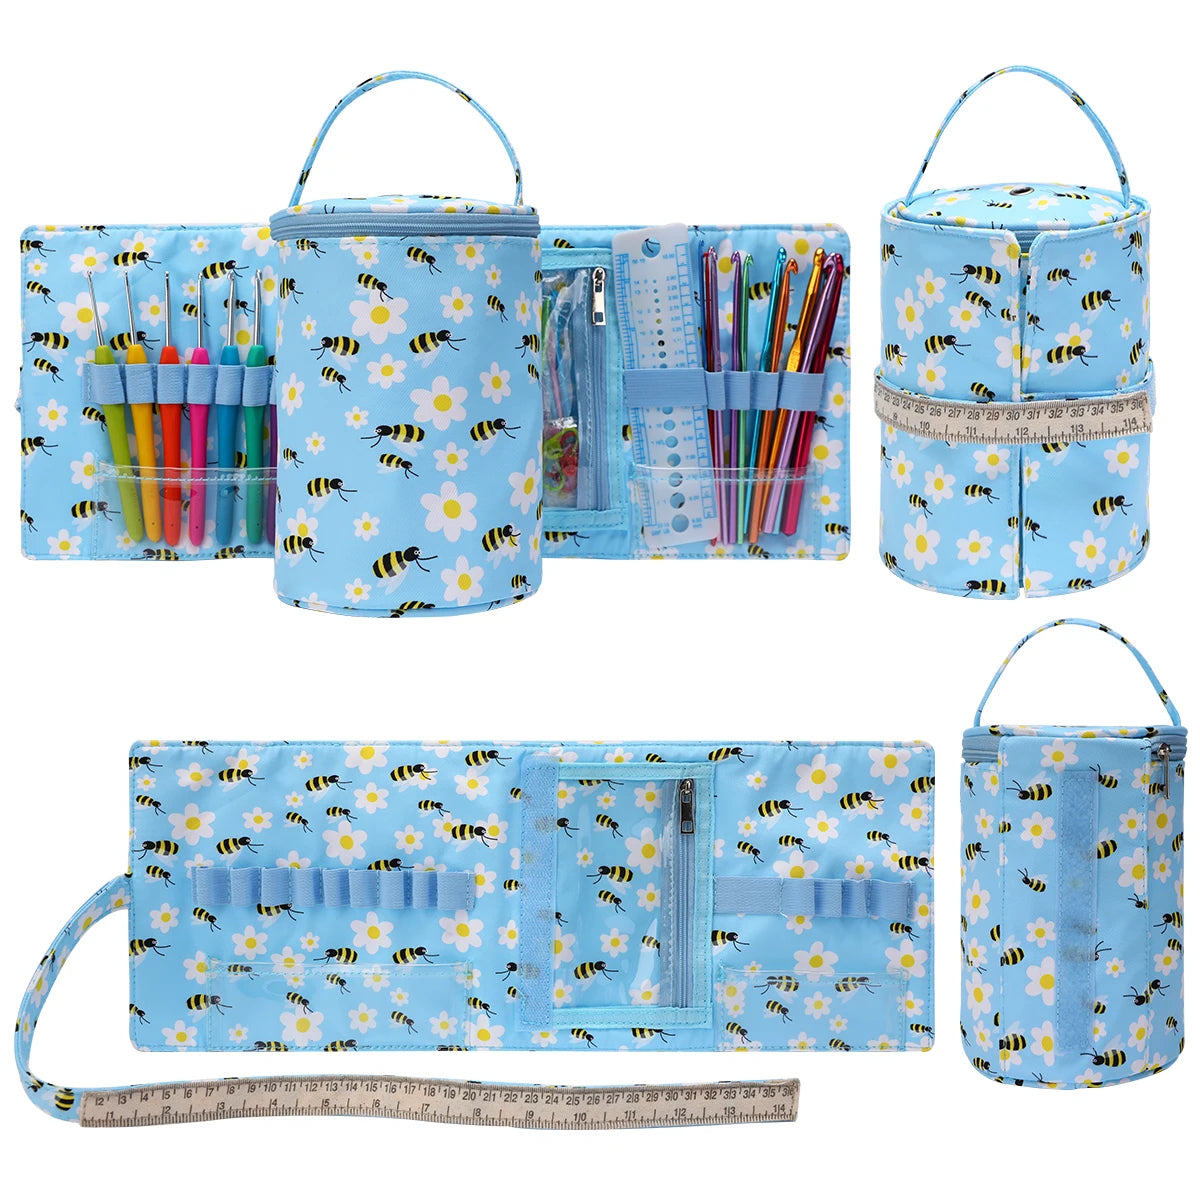 Compact Knitting Bag: Yarn Storage Organizer with bee and flower patterns, shown in various open and closed states, holding pens, pencils, and even crochet hooks, with a ruler for scale.